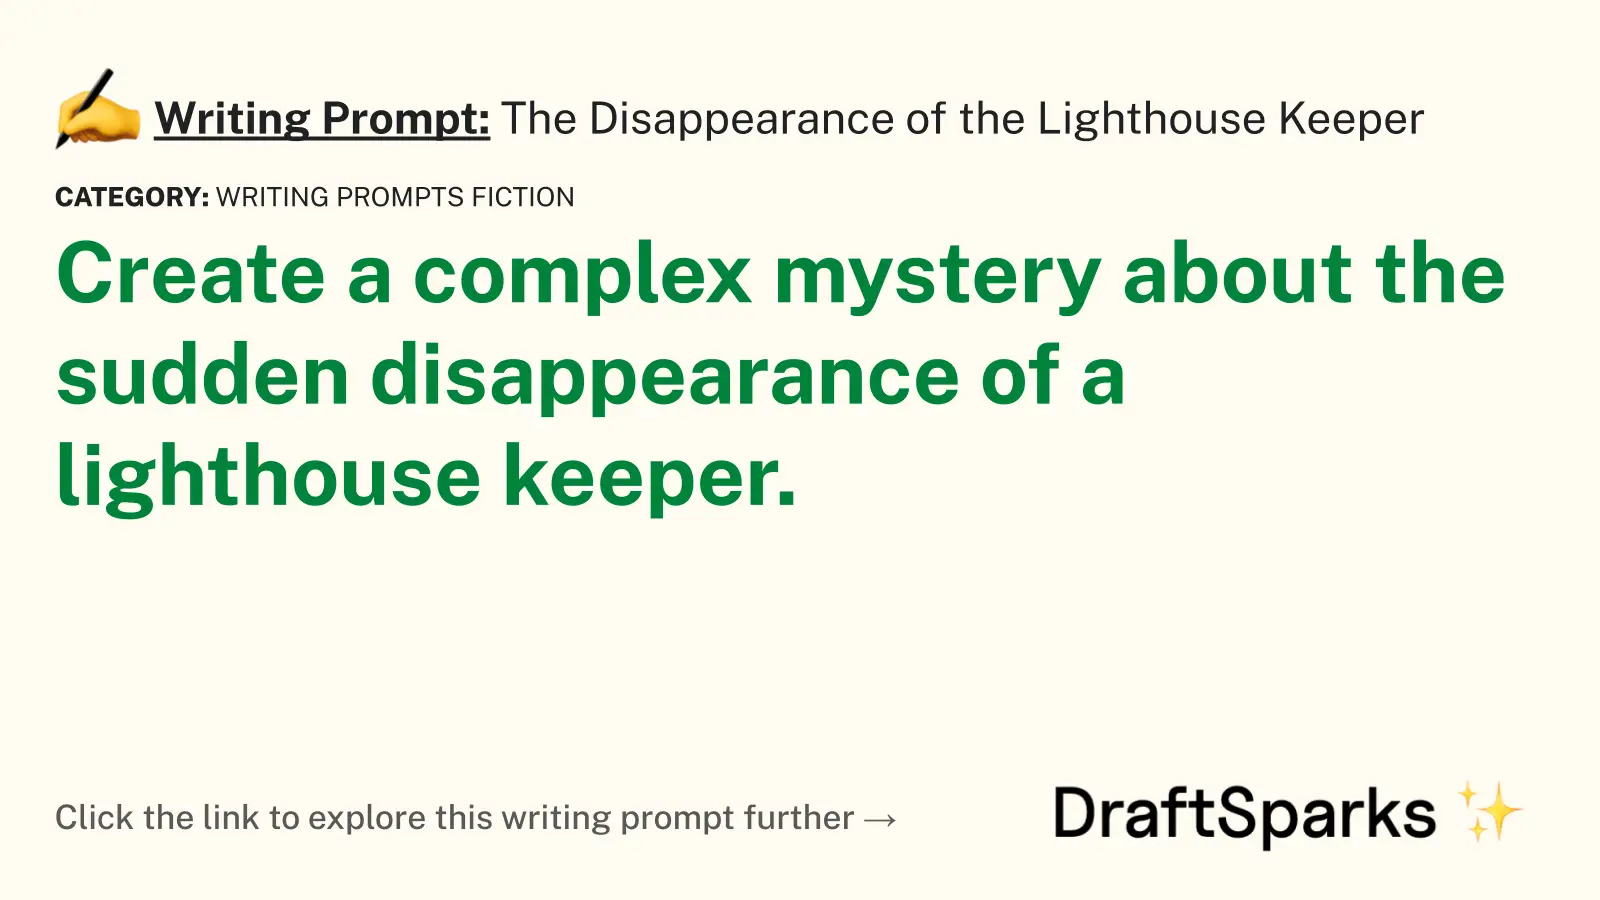 The Disappearance of the Lighthouse Keeper